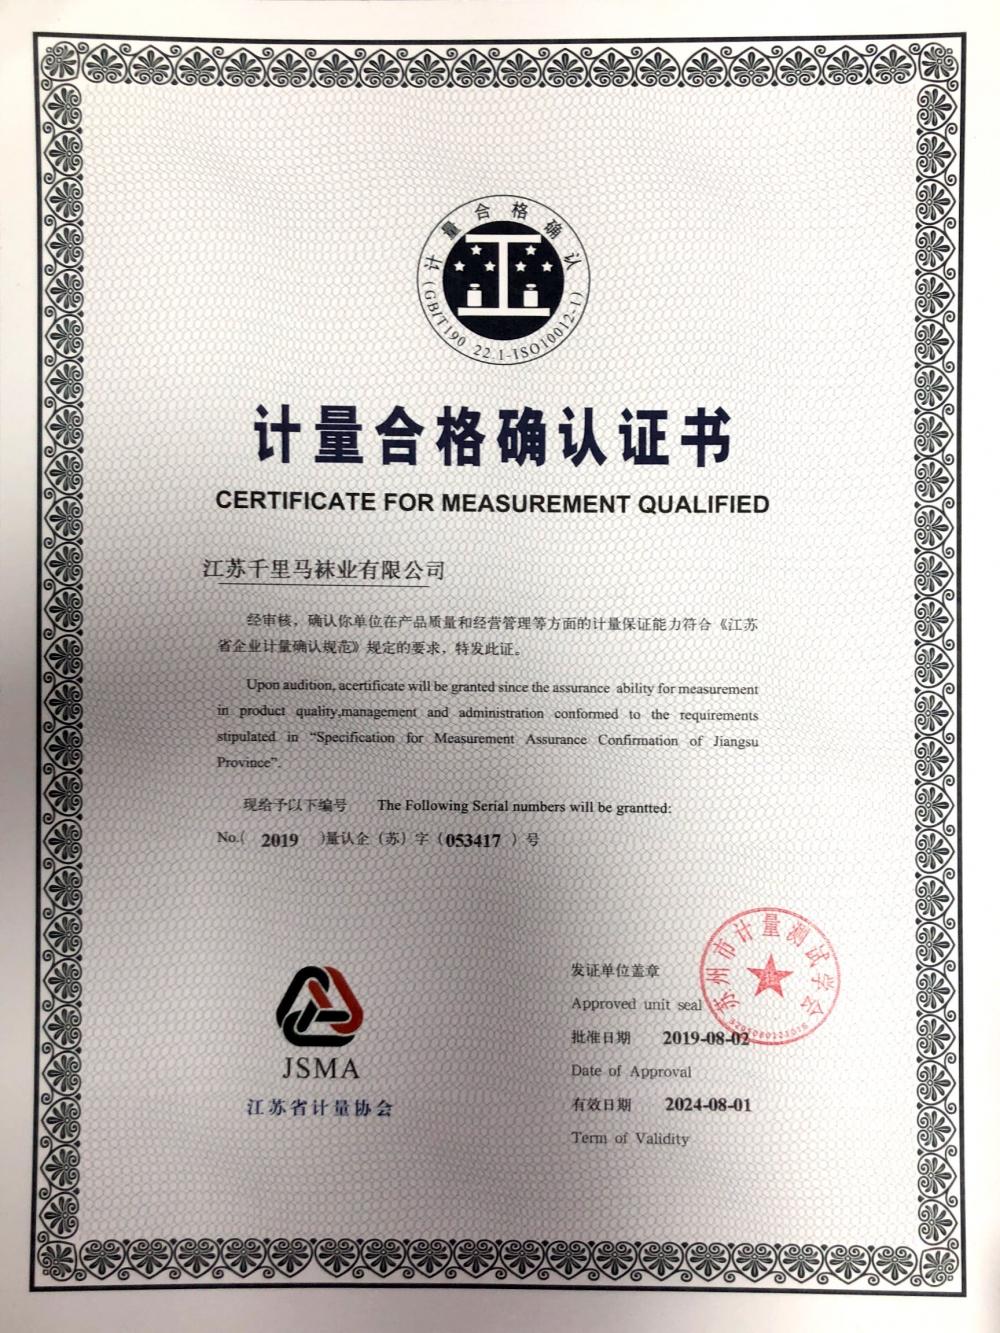 Certificate for Measurement Qualified